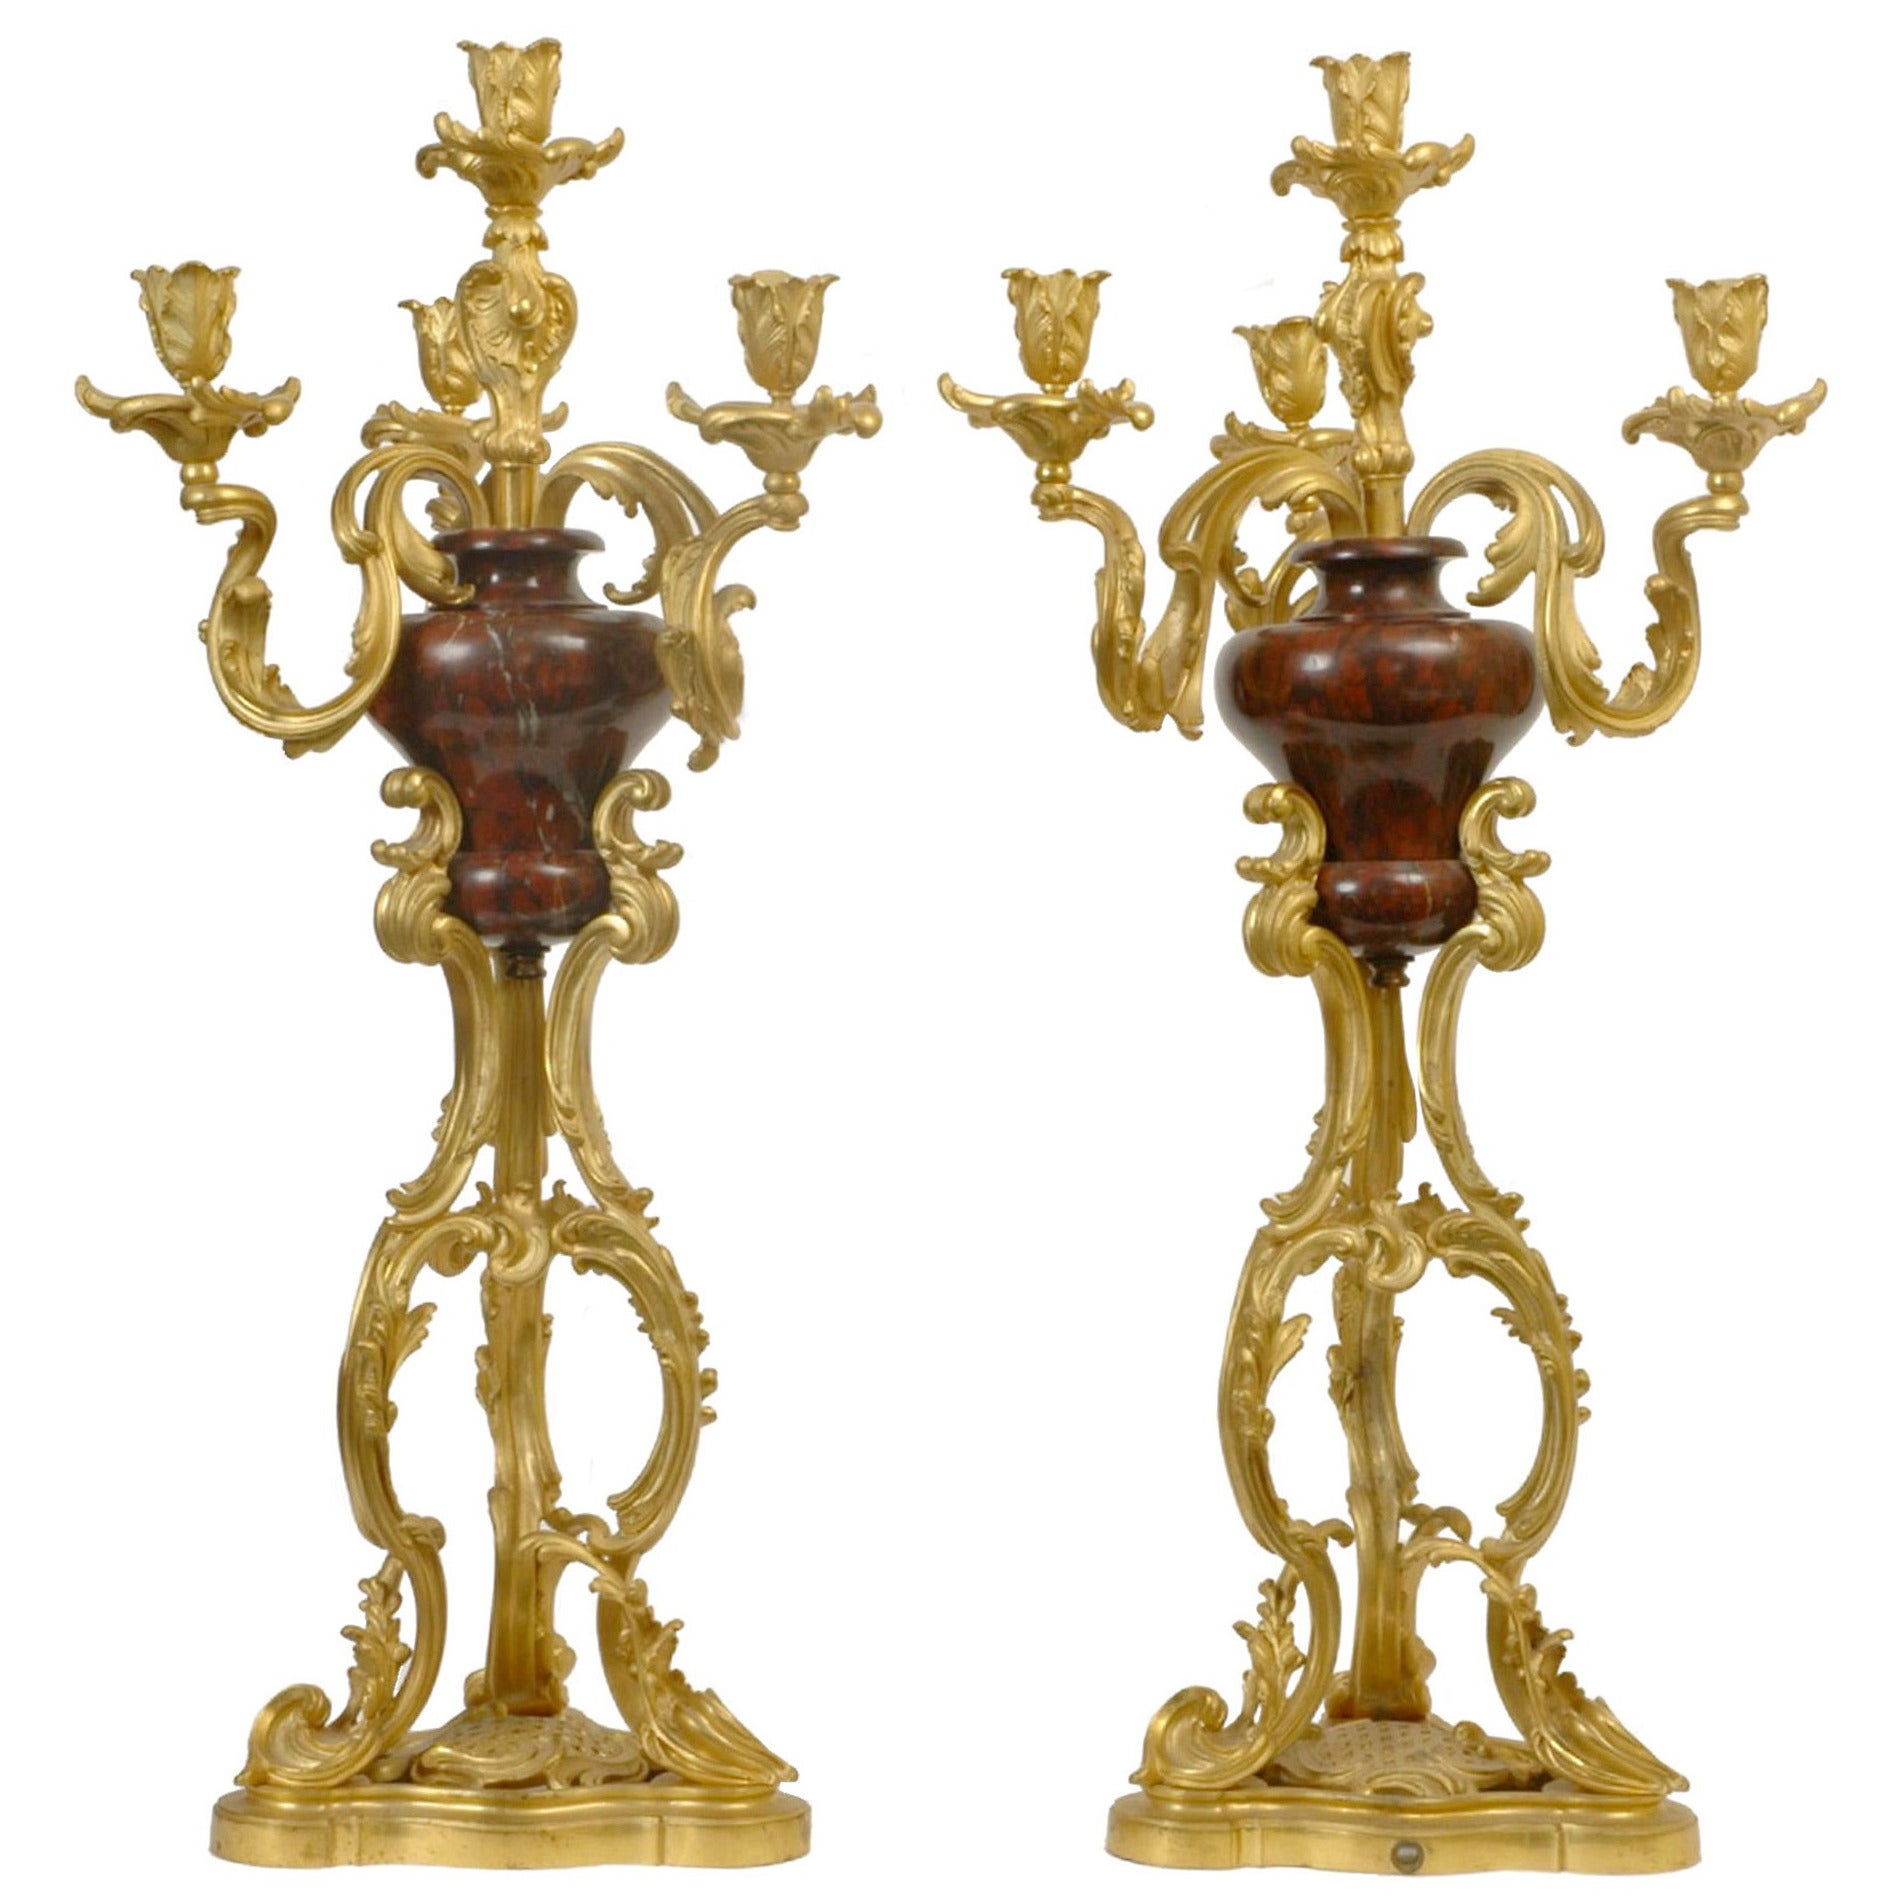 Pair of Louis XV Style Gilt Bronze and Marble Candelabras